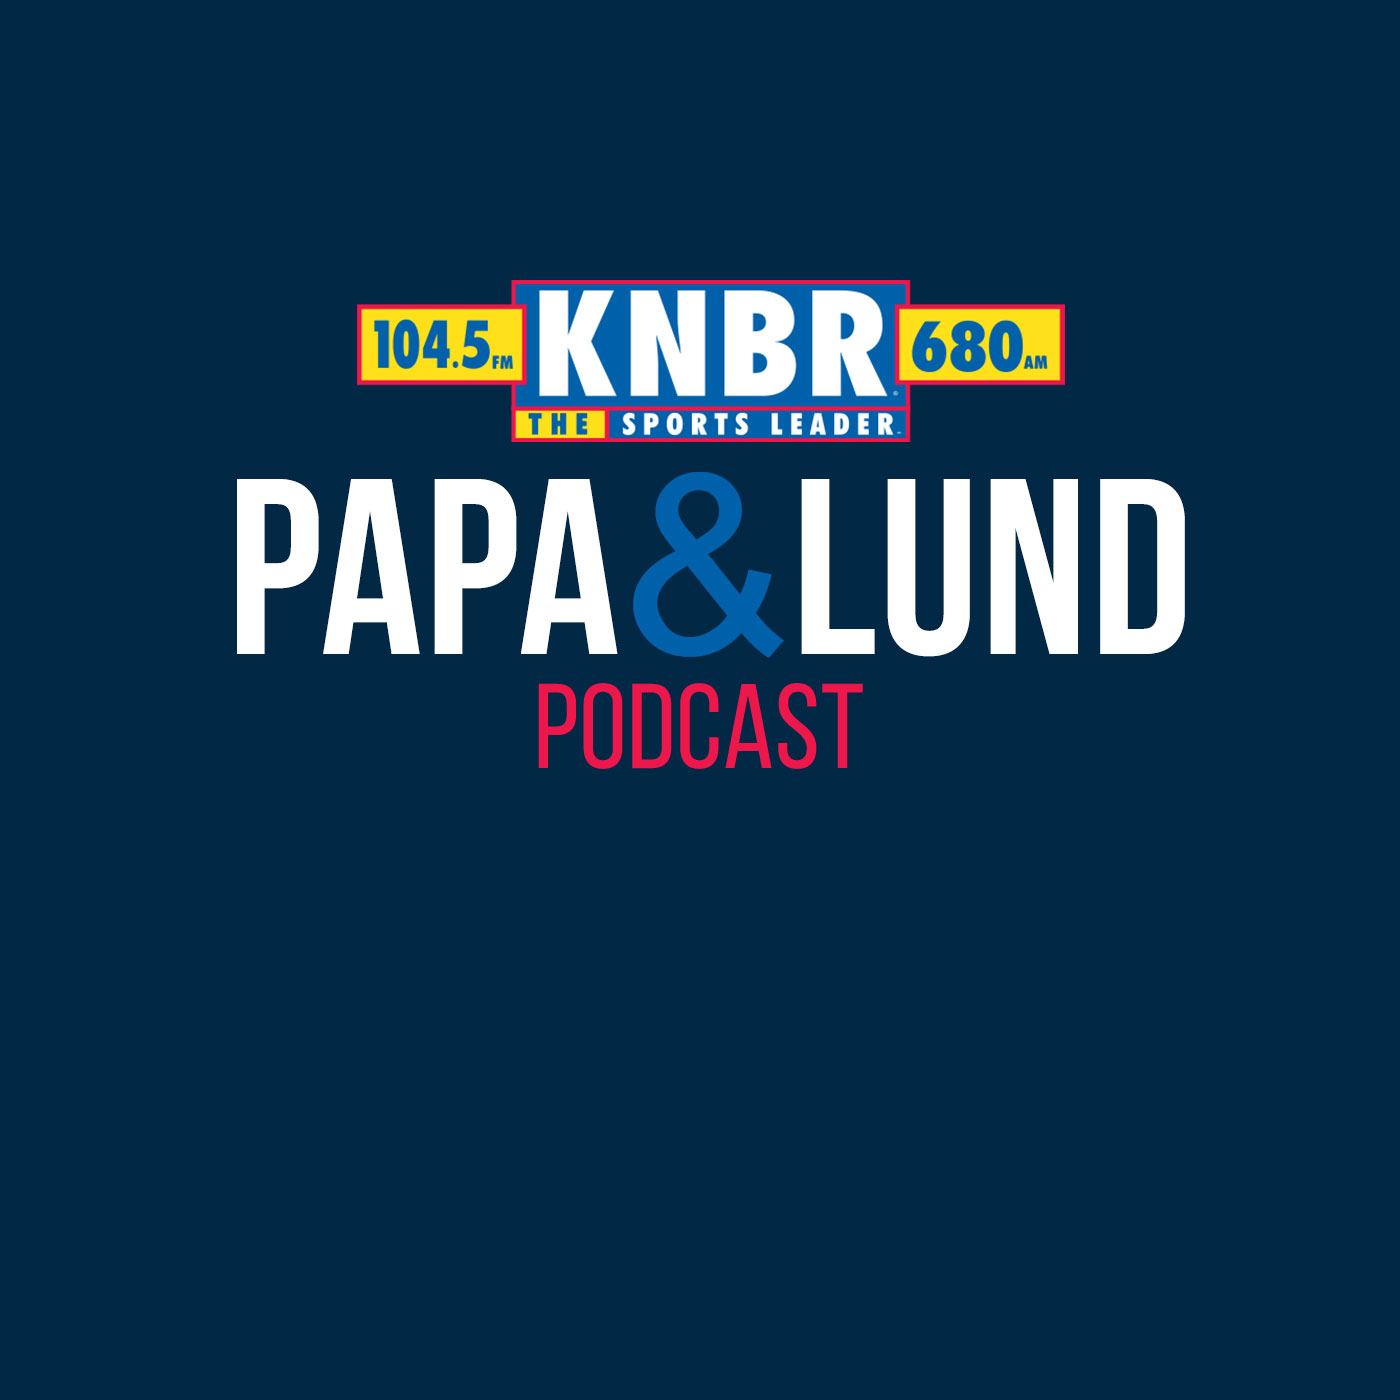 6-13 P.J. Carlisimo joins Papa & Lund to discuss the 4th quarter benching of Draymond Green and how Draymond made huge winning plays in the final minutes